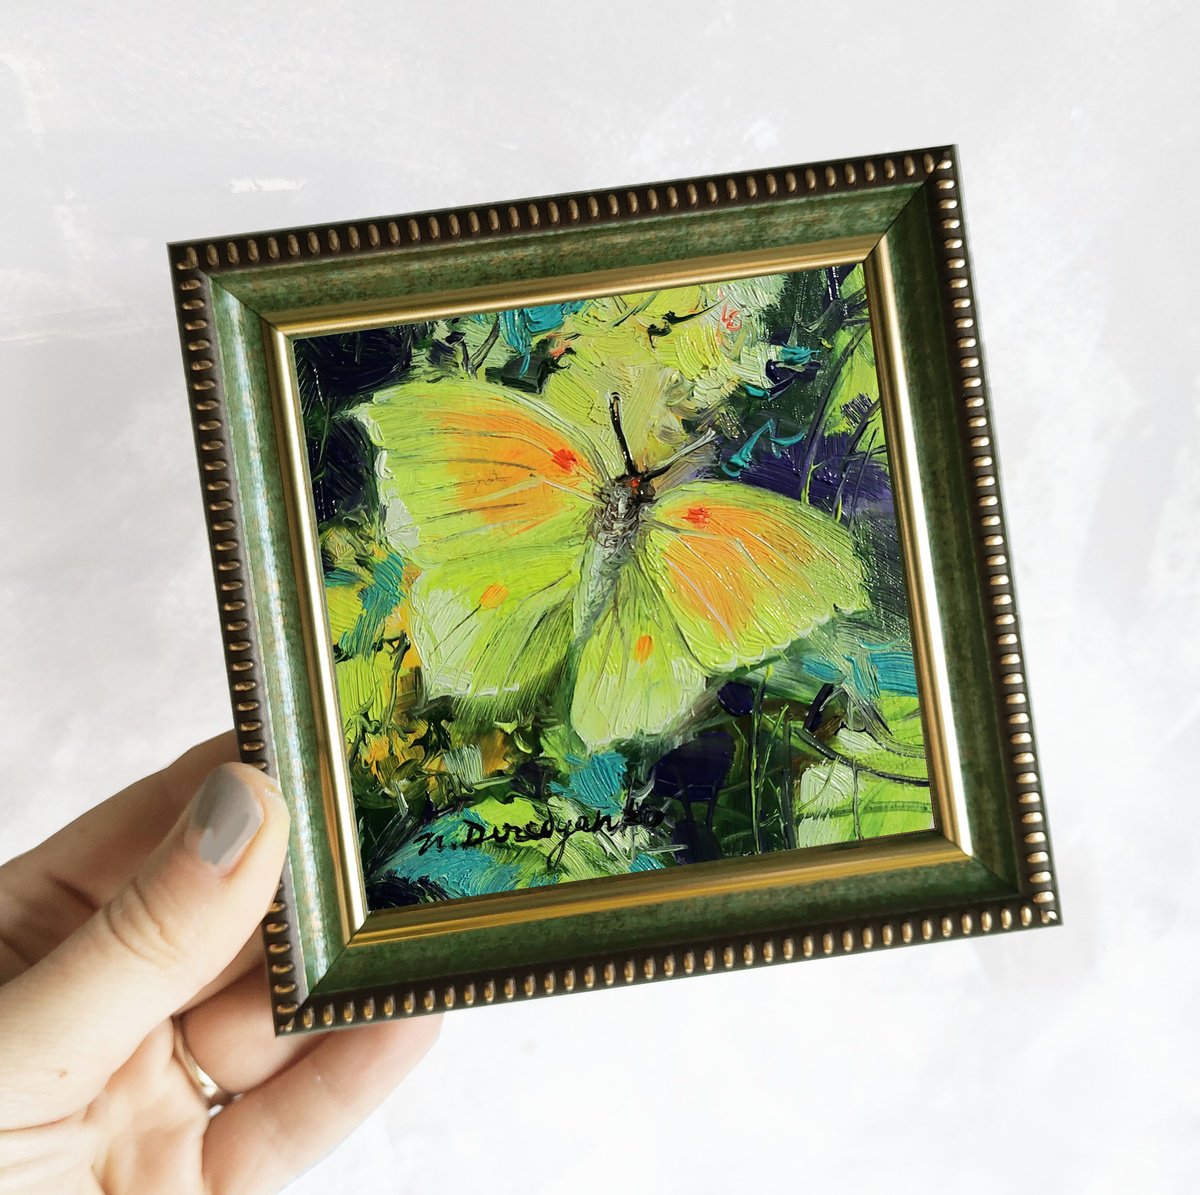 Butterfly oil painting original small art gold frame, Brimstone butterfly yellow painting... by Nataly Derevyanko